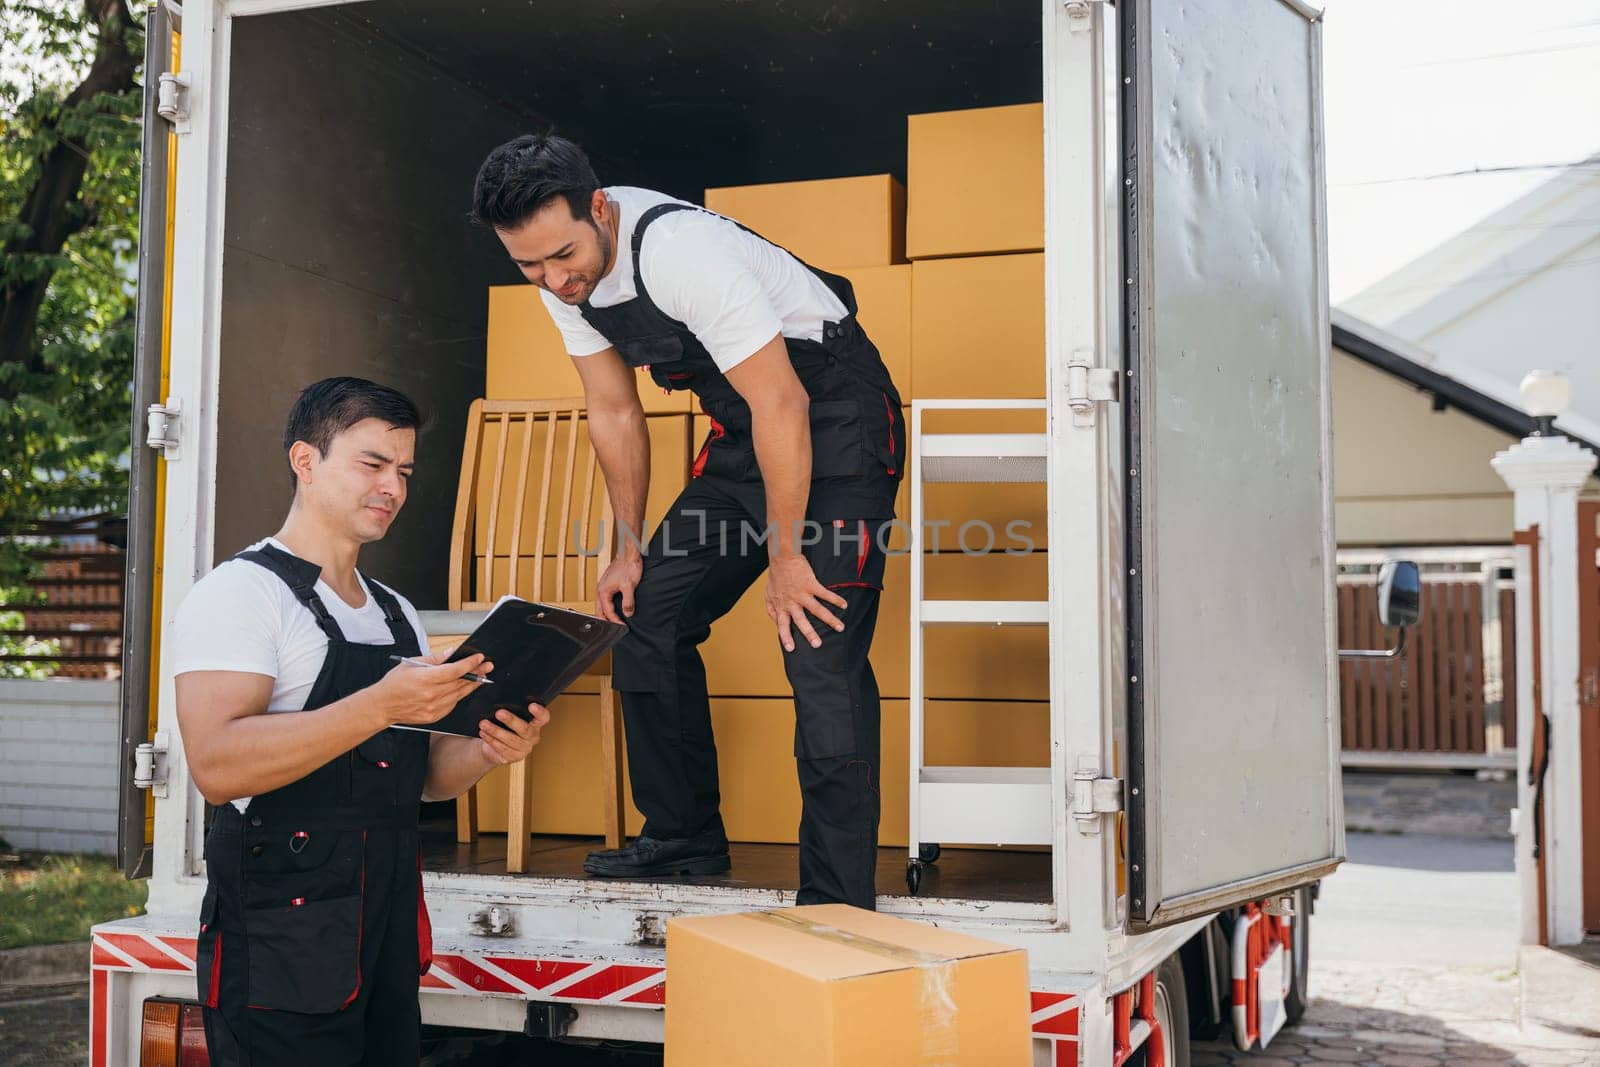 Workers in uniform unload boxes inspecting shipment with a clipboard near the truck. Professional movers ensure efficient delivery and seamless relocation. Moving day concept by Sorapop